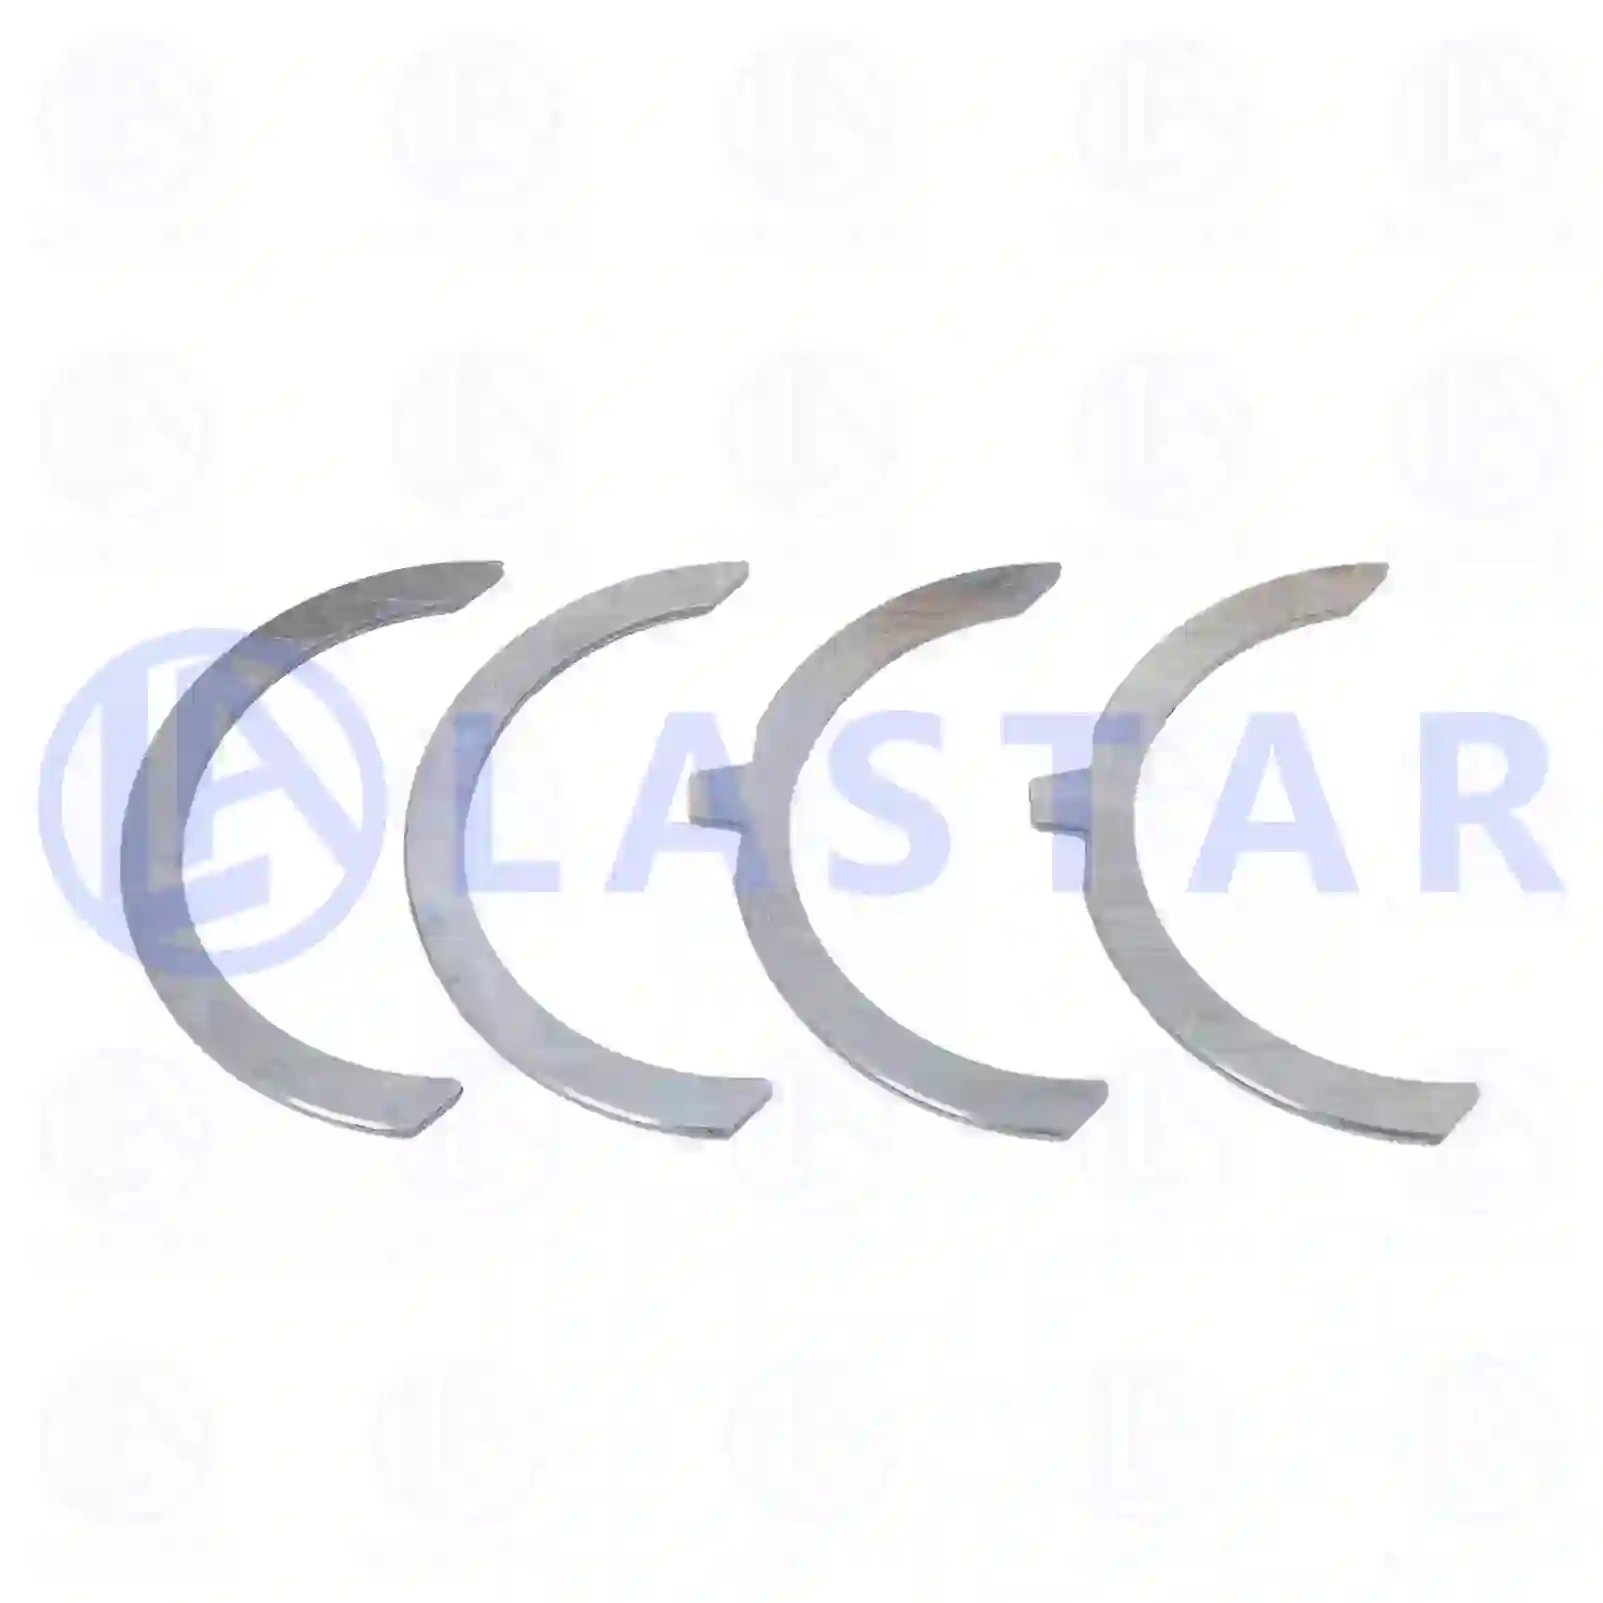 Thrust washer kit, 77701014, 51011140180, 51011140180S, 51011140181 ||  77701014 Lastar Spare Part | Truck Spare Parts, Auotomotive Spare Parts Thrust washer kit, 77701014, 51011140180, 51011140180S, 51011140181 ||  77701014 Lastar Spare Part | Truck Spare Parts, Auotomotive Spare Parts